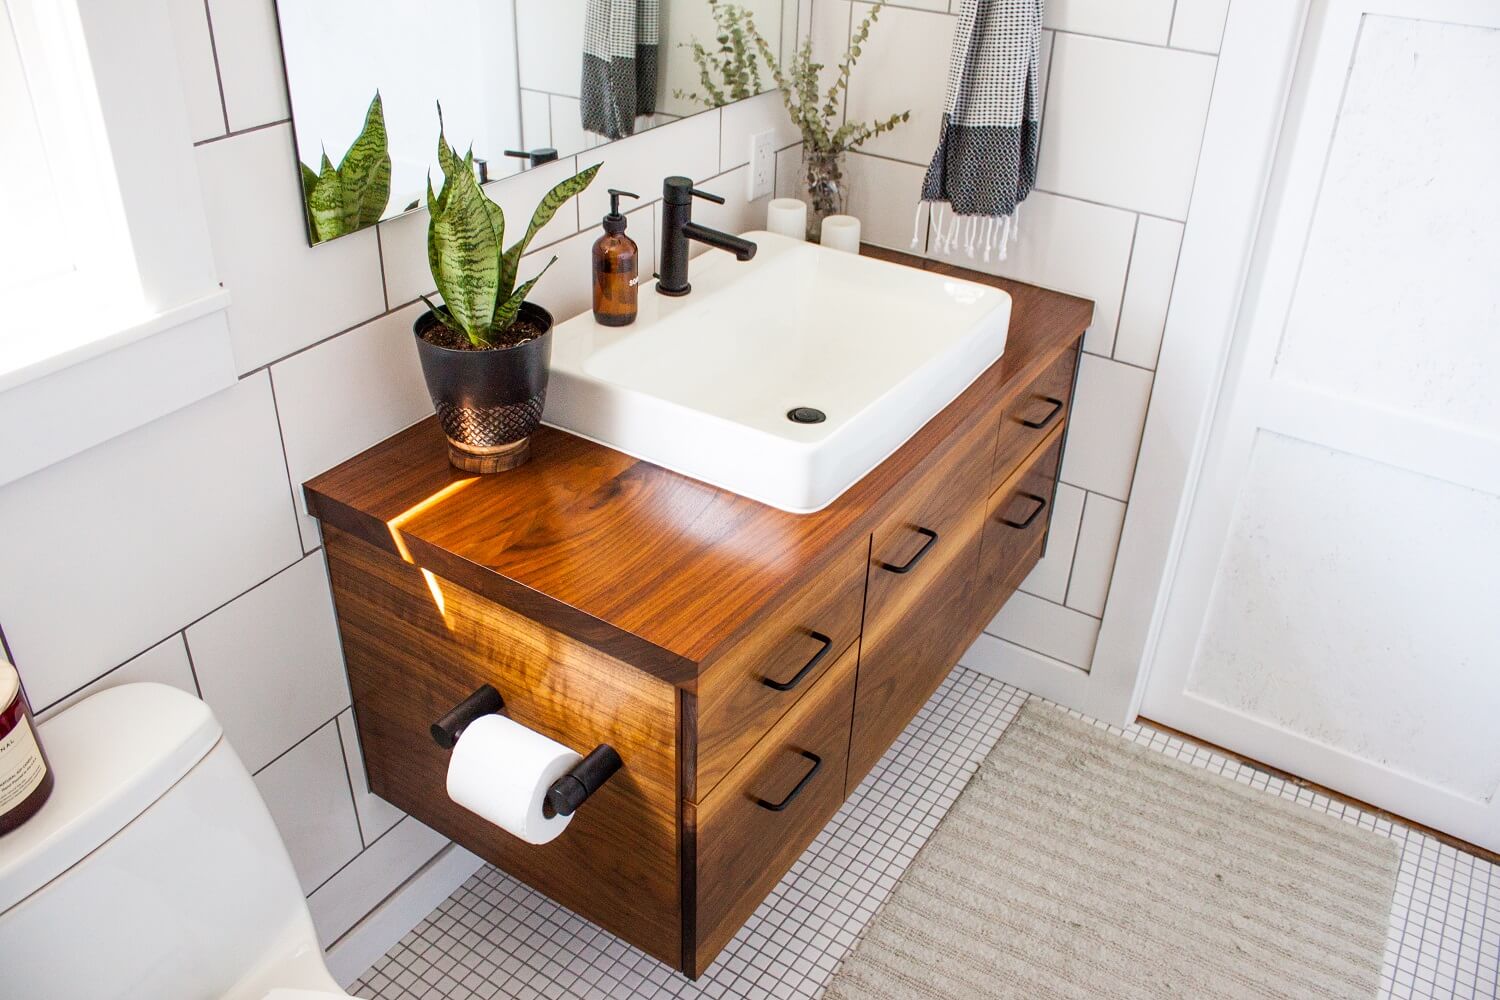 Steps to remodel a bathroom - modern decorated bathroom vanity in a modern white bathroom with natural light and plants.